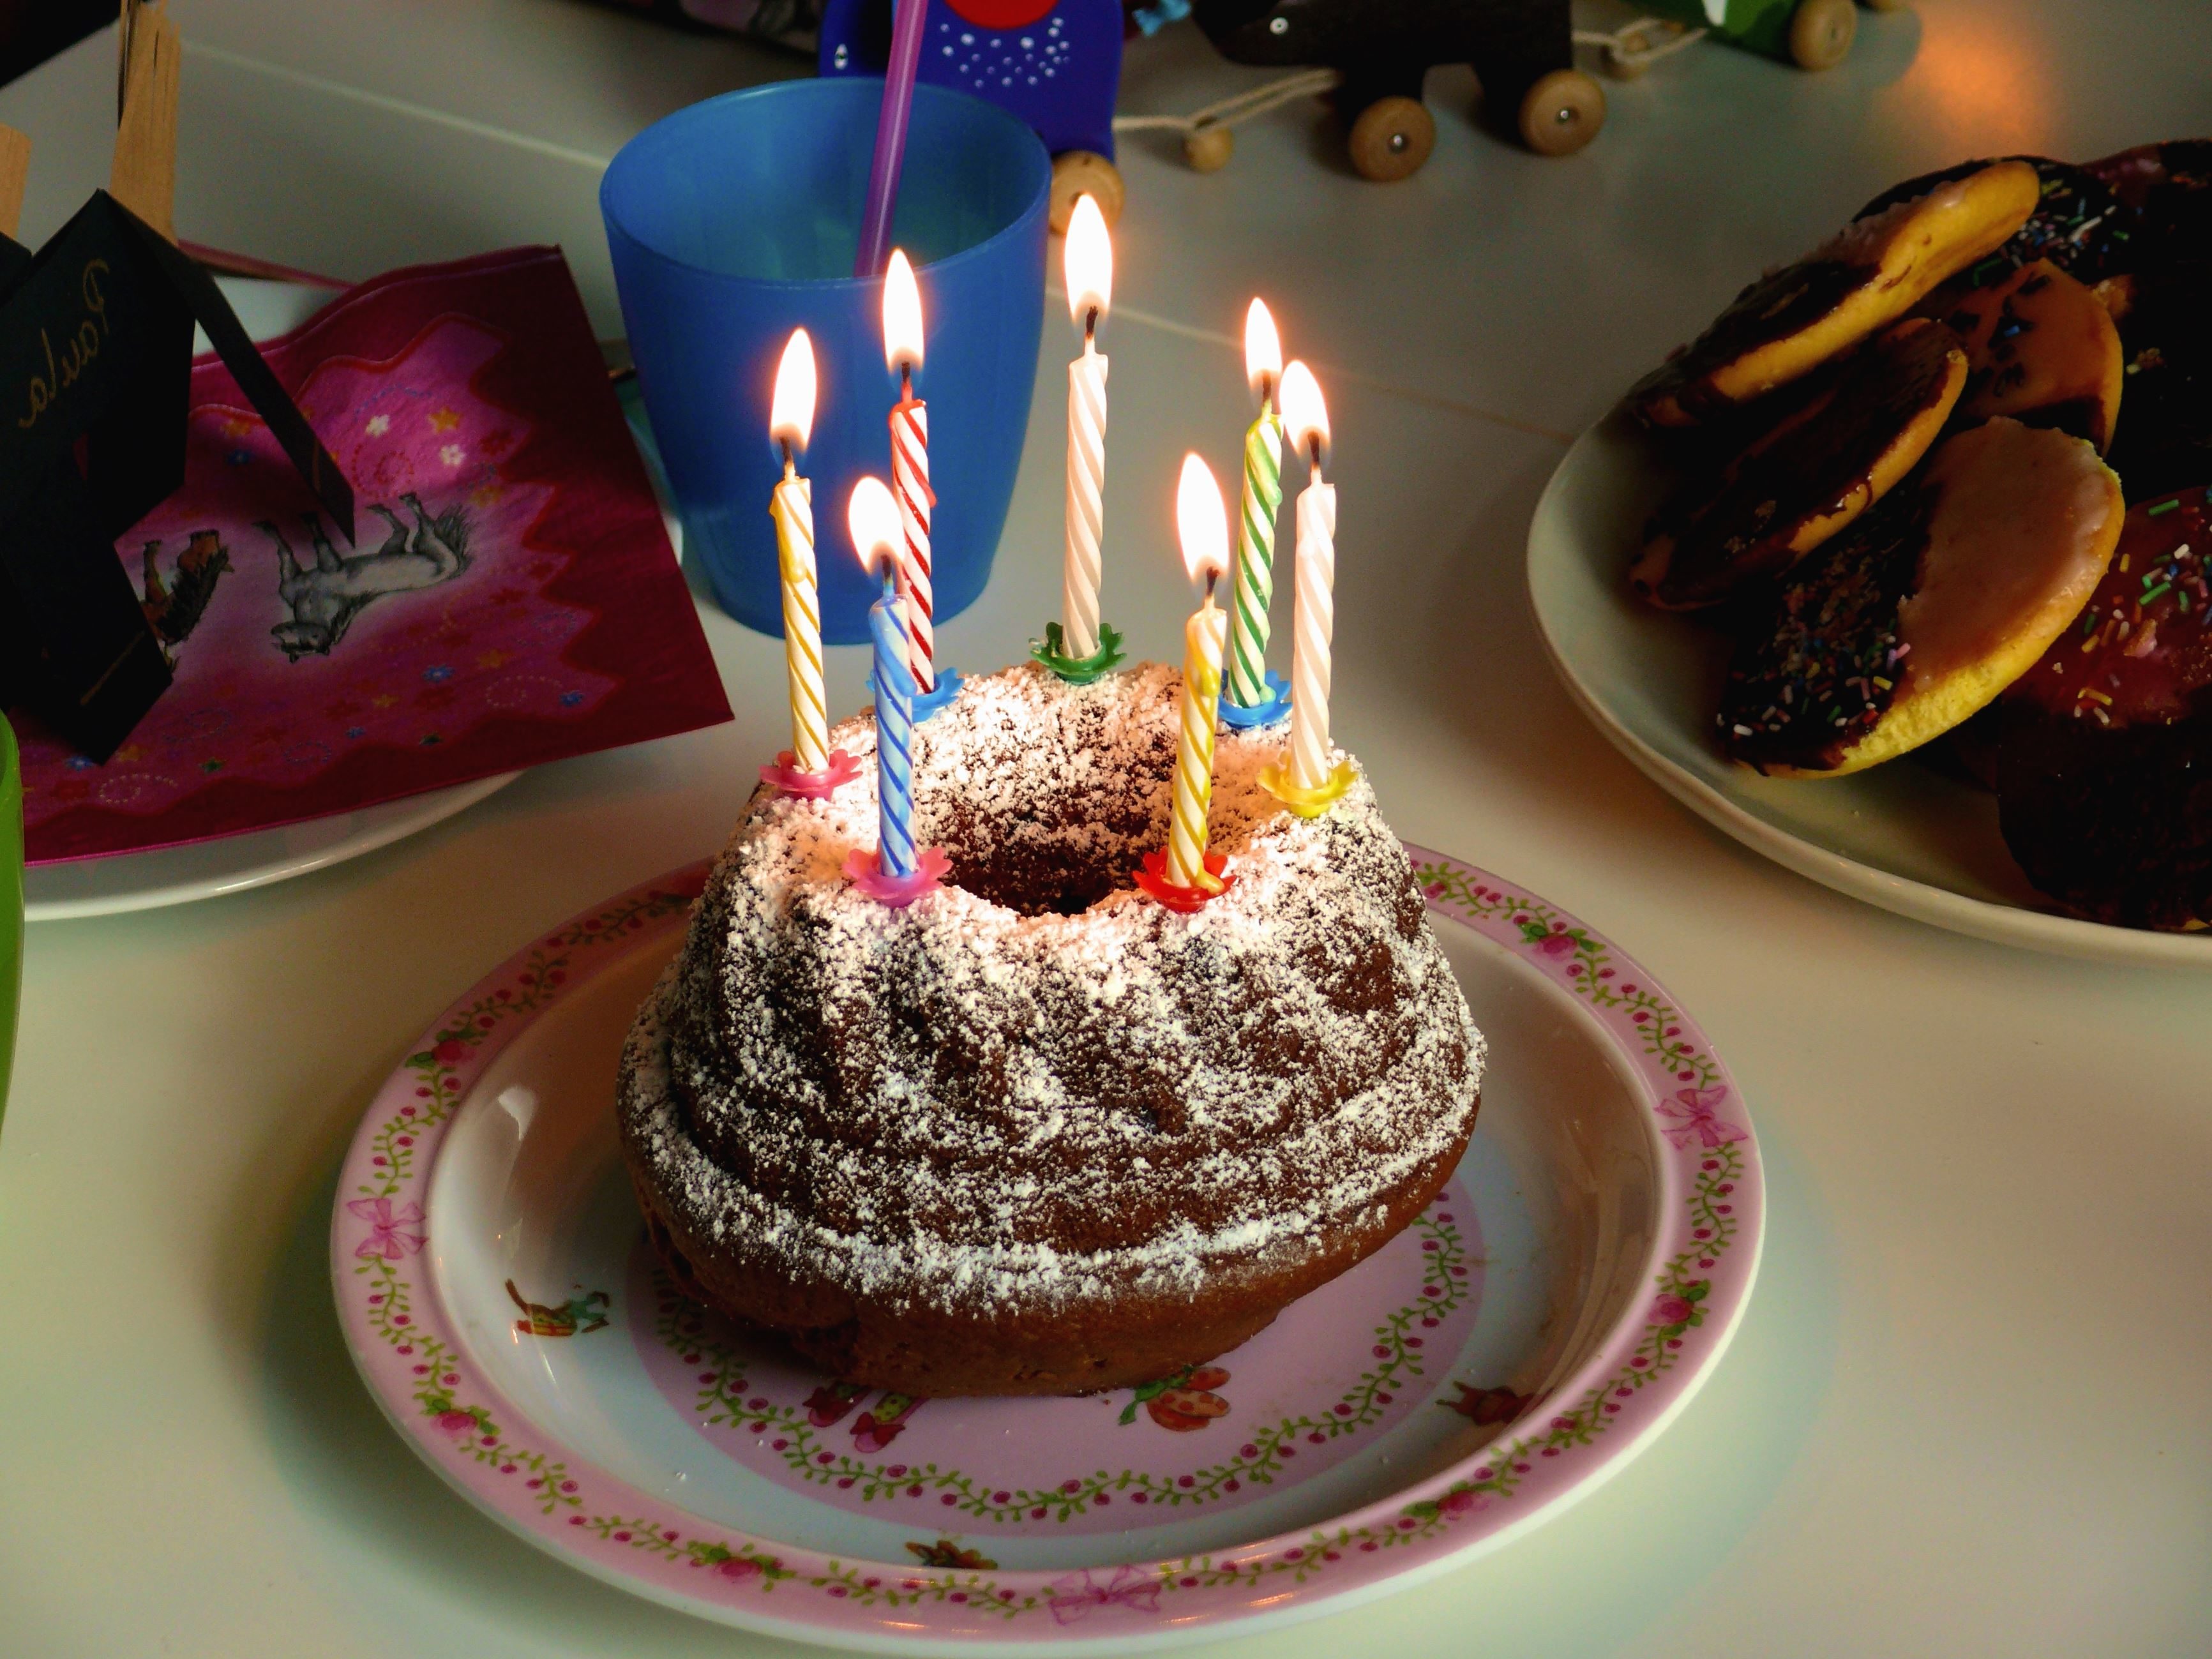 Free picture: cake, birthday, celebration, candle, plate ...